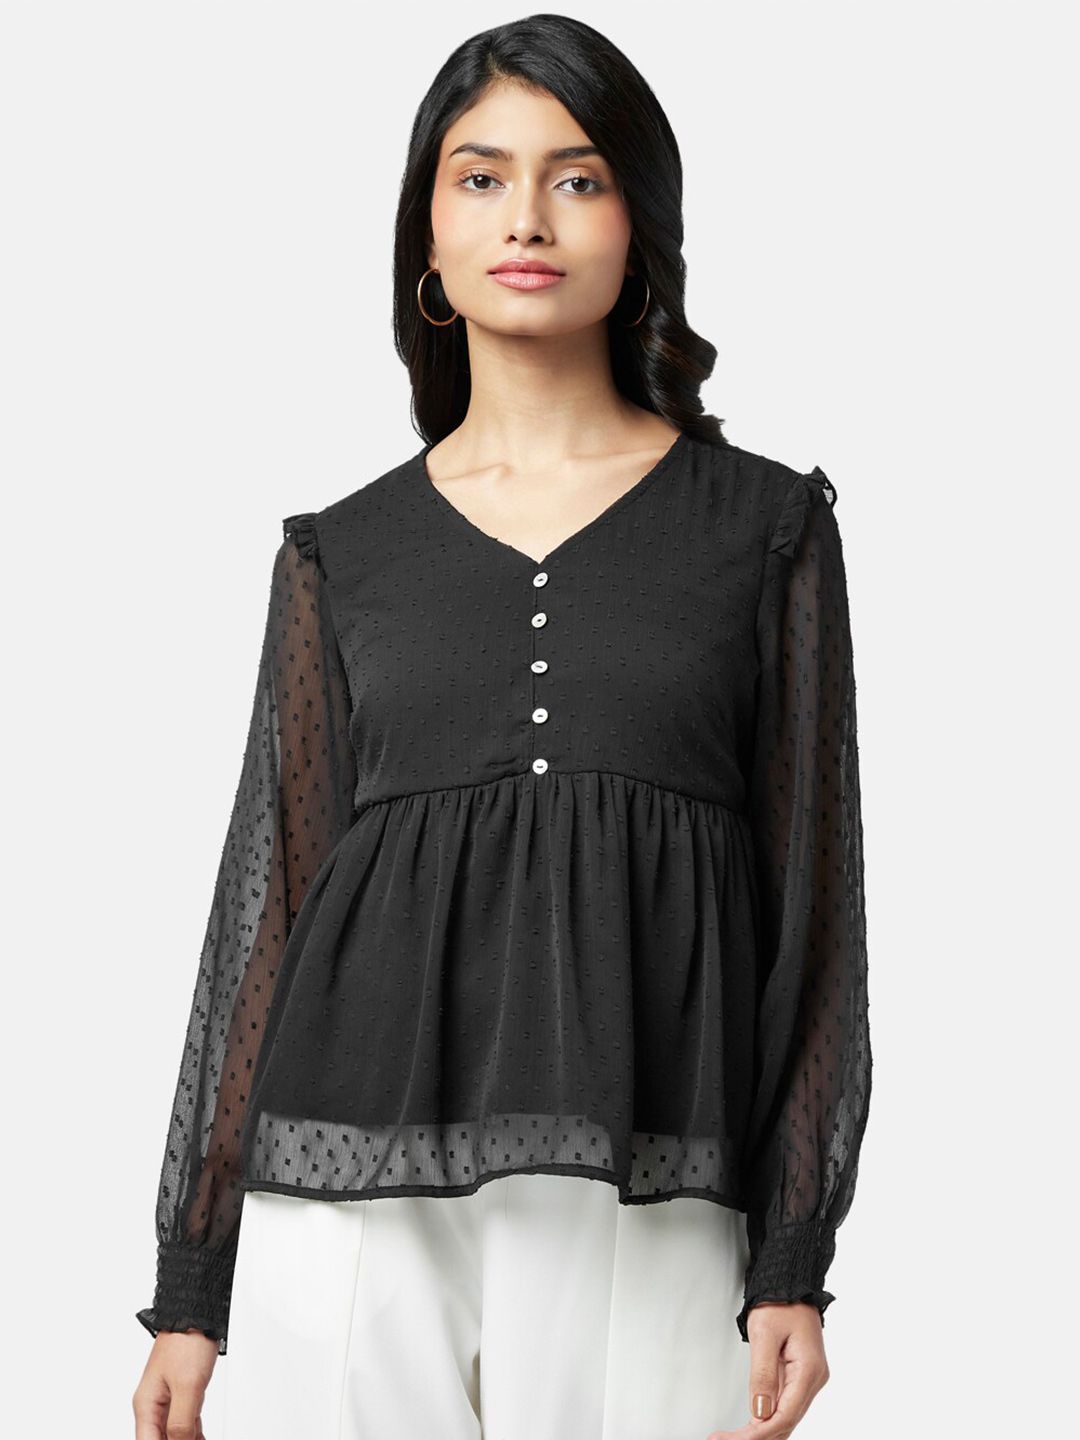 Honey by Pantaloons Black Empire Top Price in India